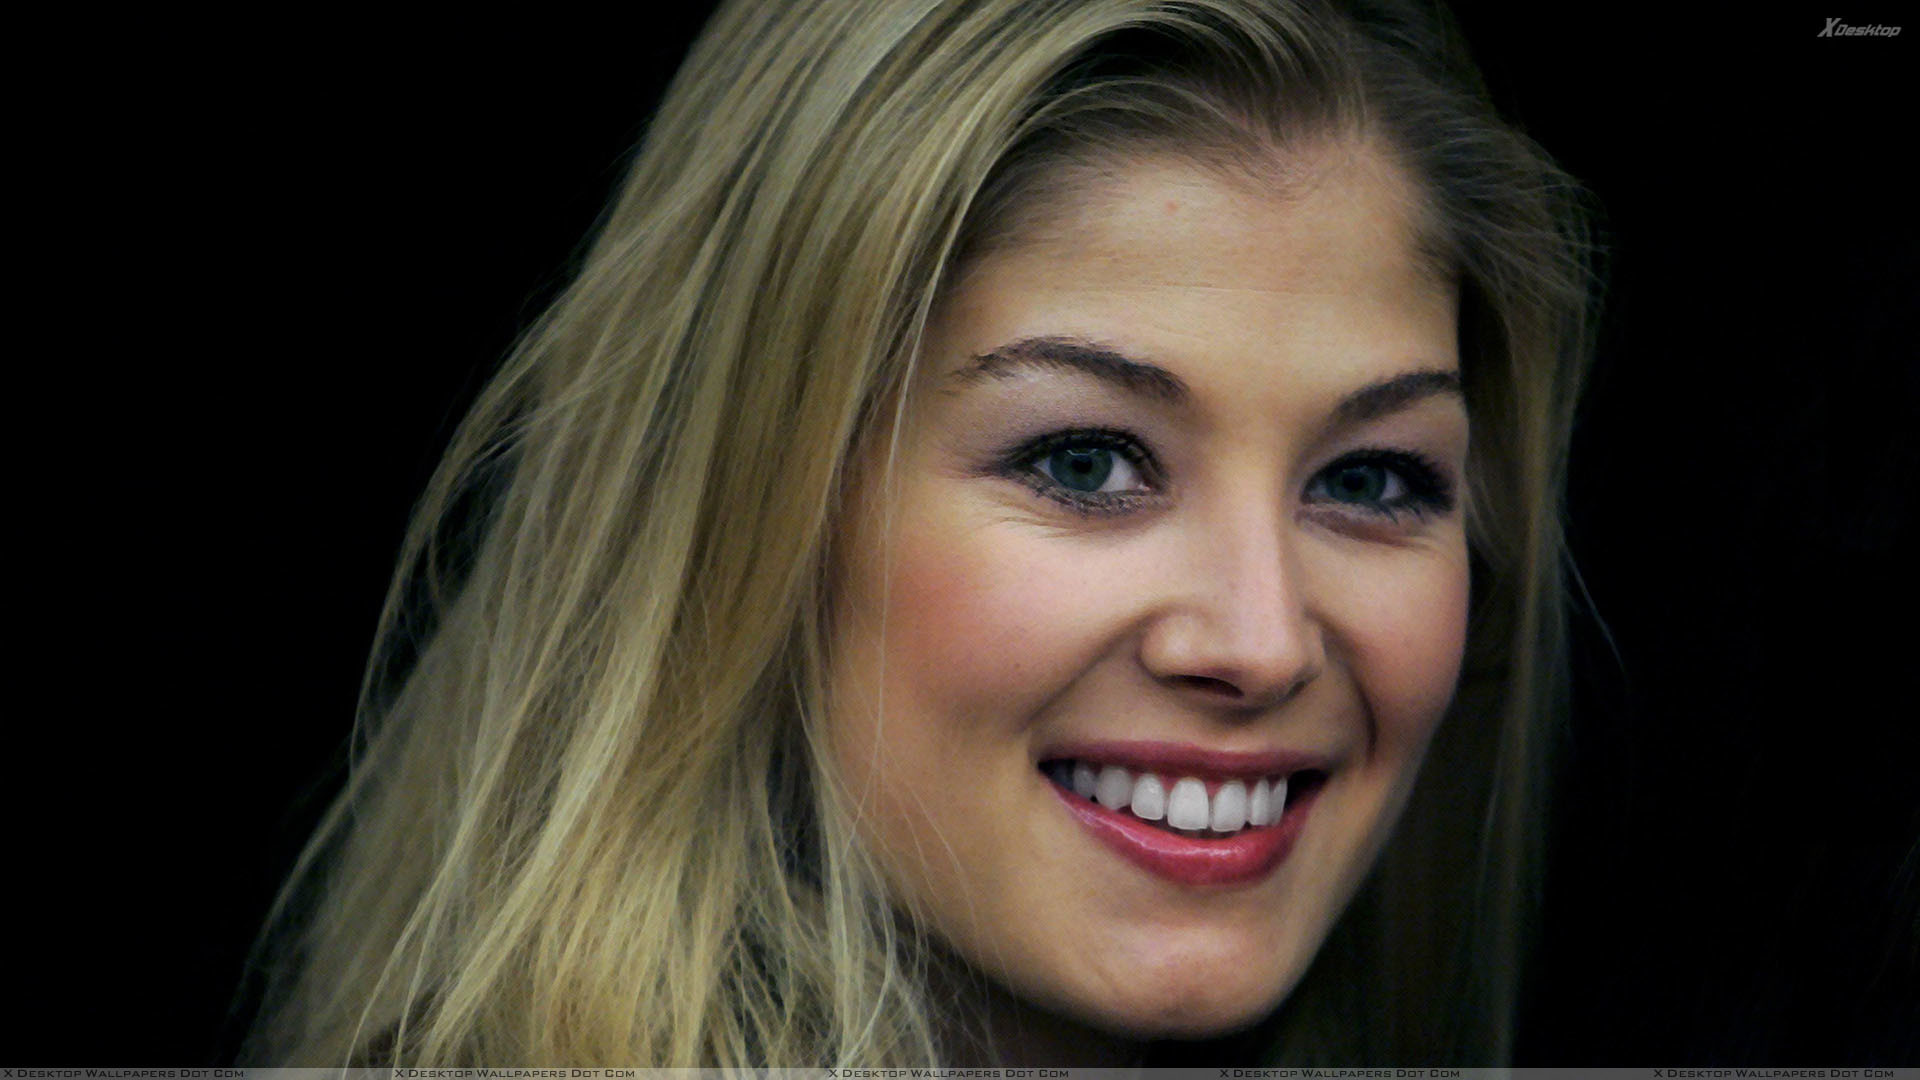 Rosamund pike smiling red lips and black background face closeupjpg ãâ